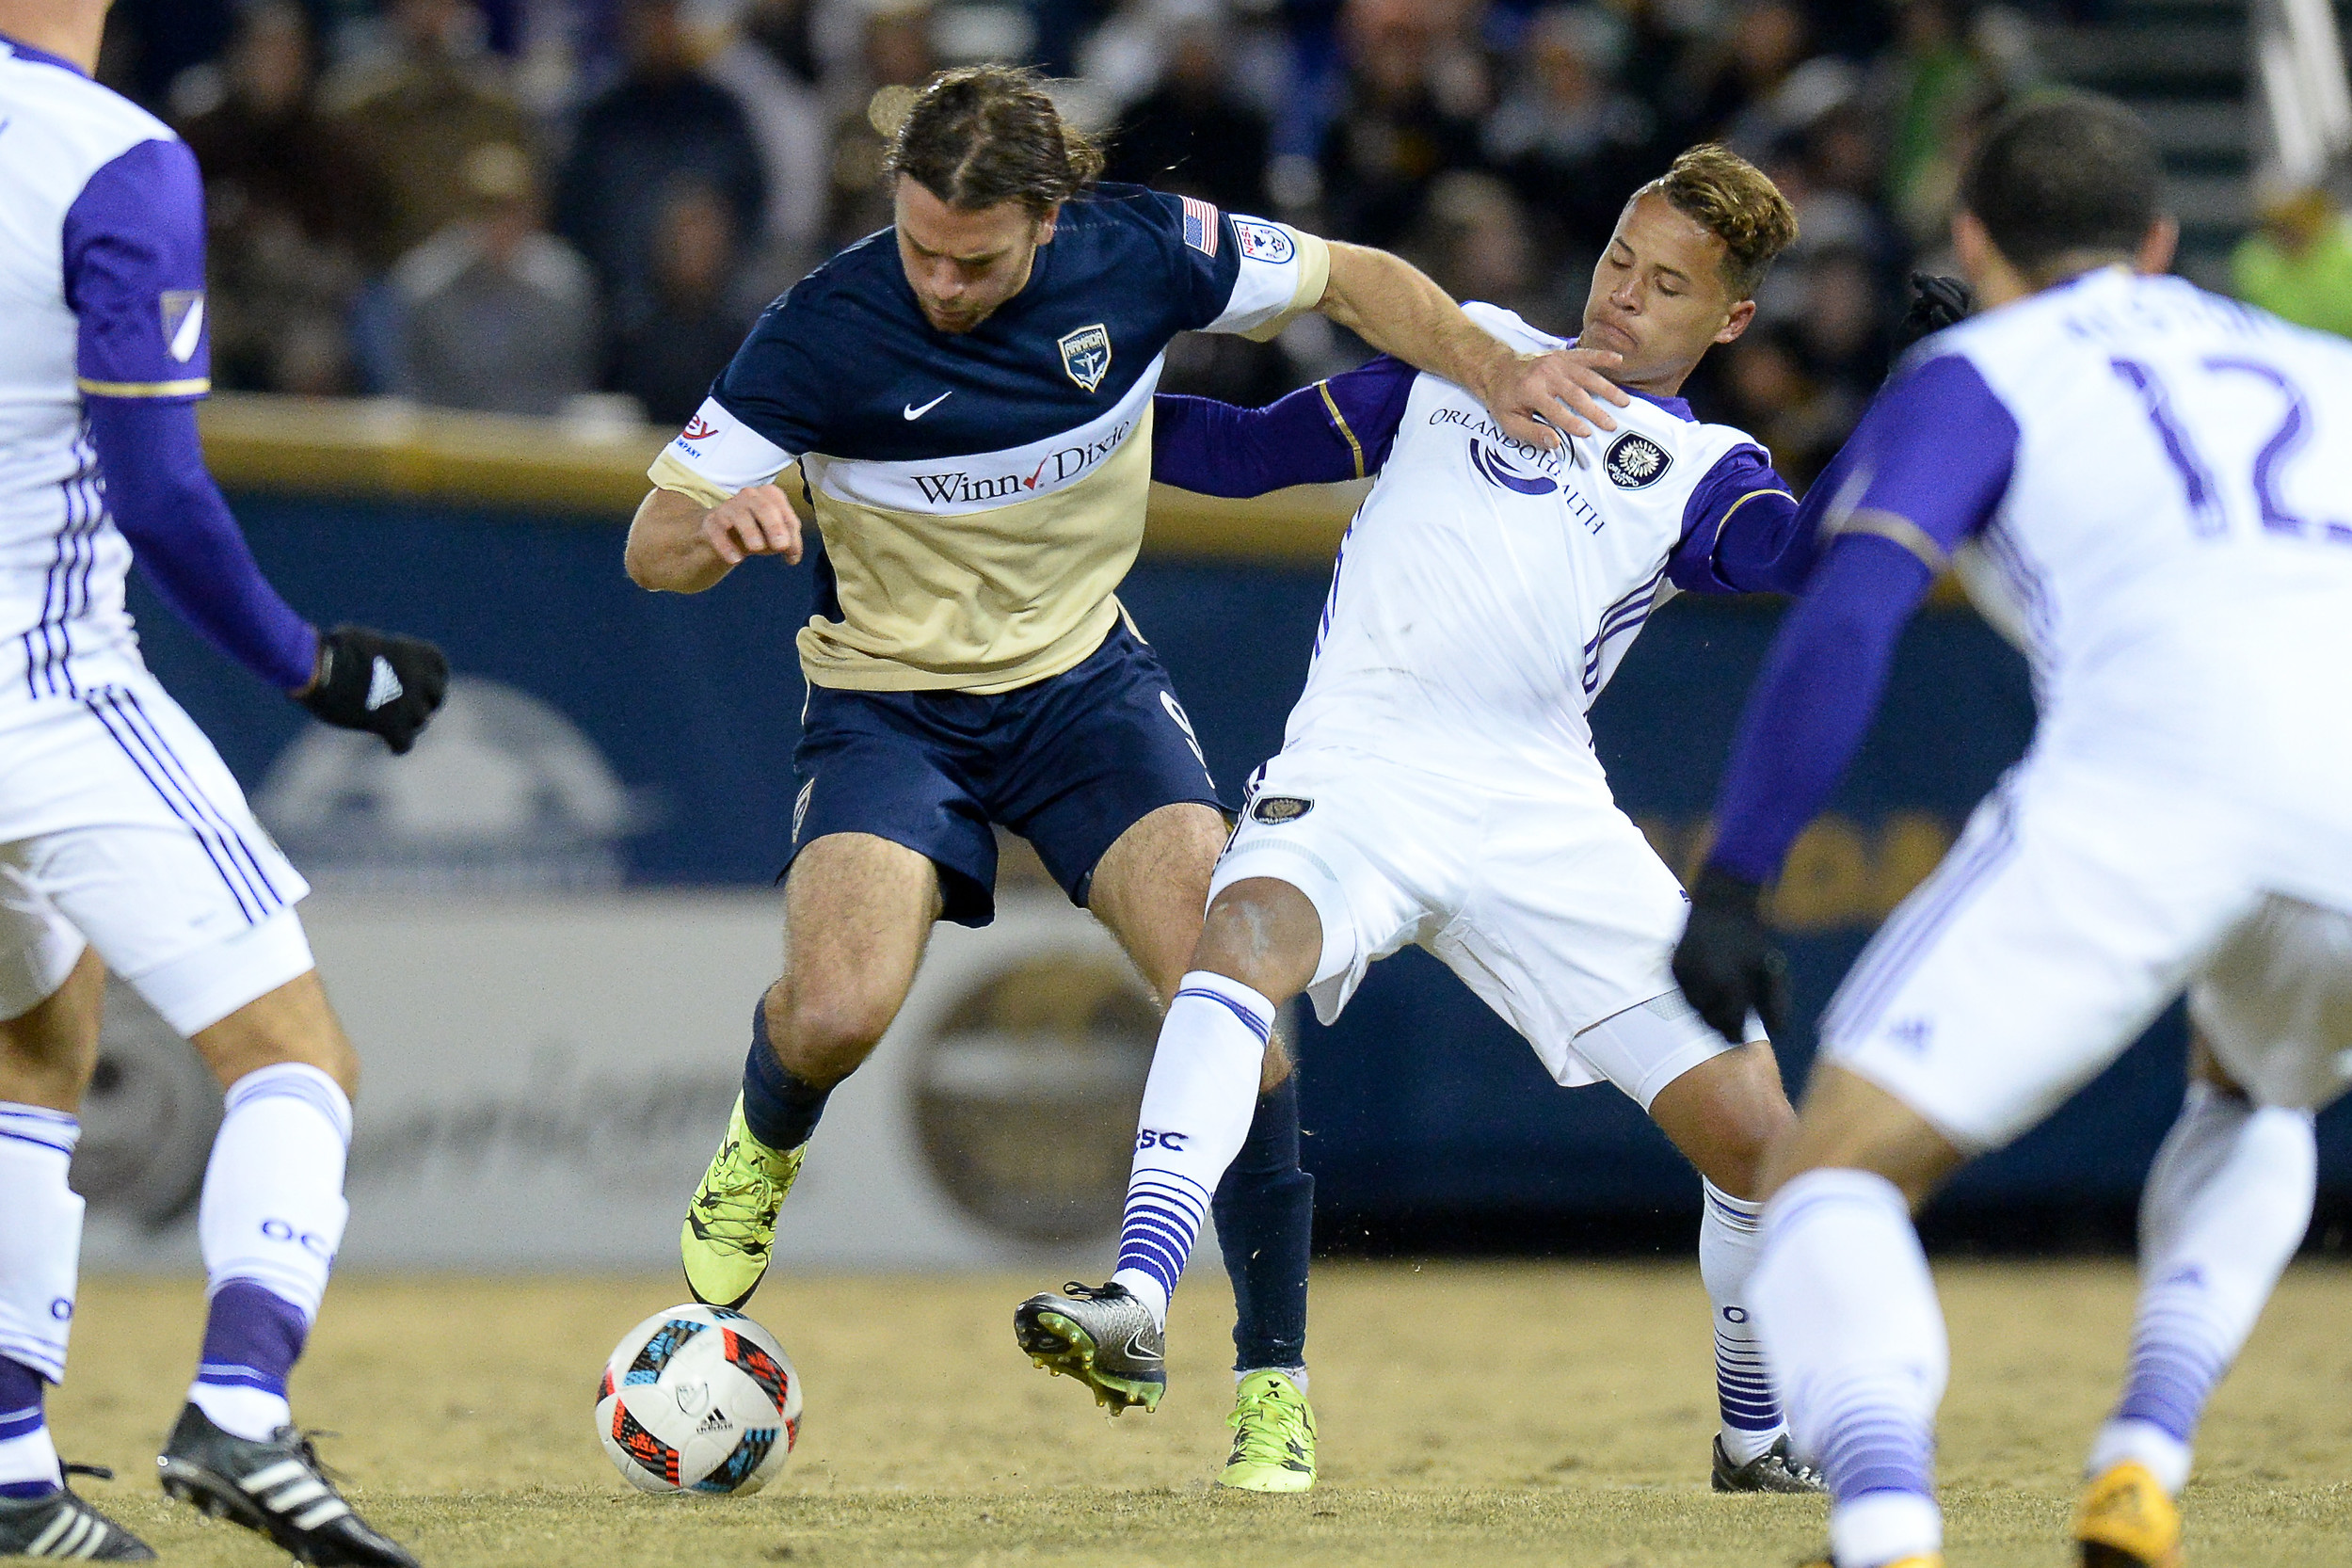 Coming off the 2-1 preseason win over Orlando, the Jacksonville Armada FC returns to action on Feb. 24 at the University of North Florida before hosting the MLS’s New York Red Bulls on Feb. 27.